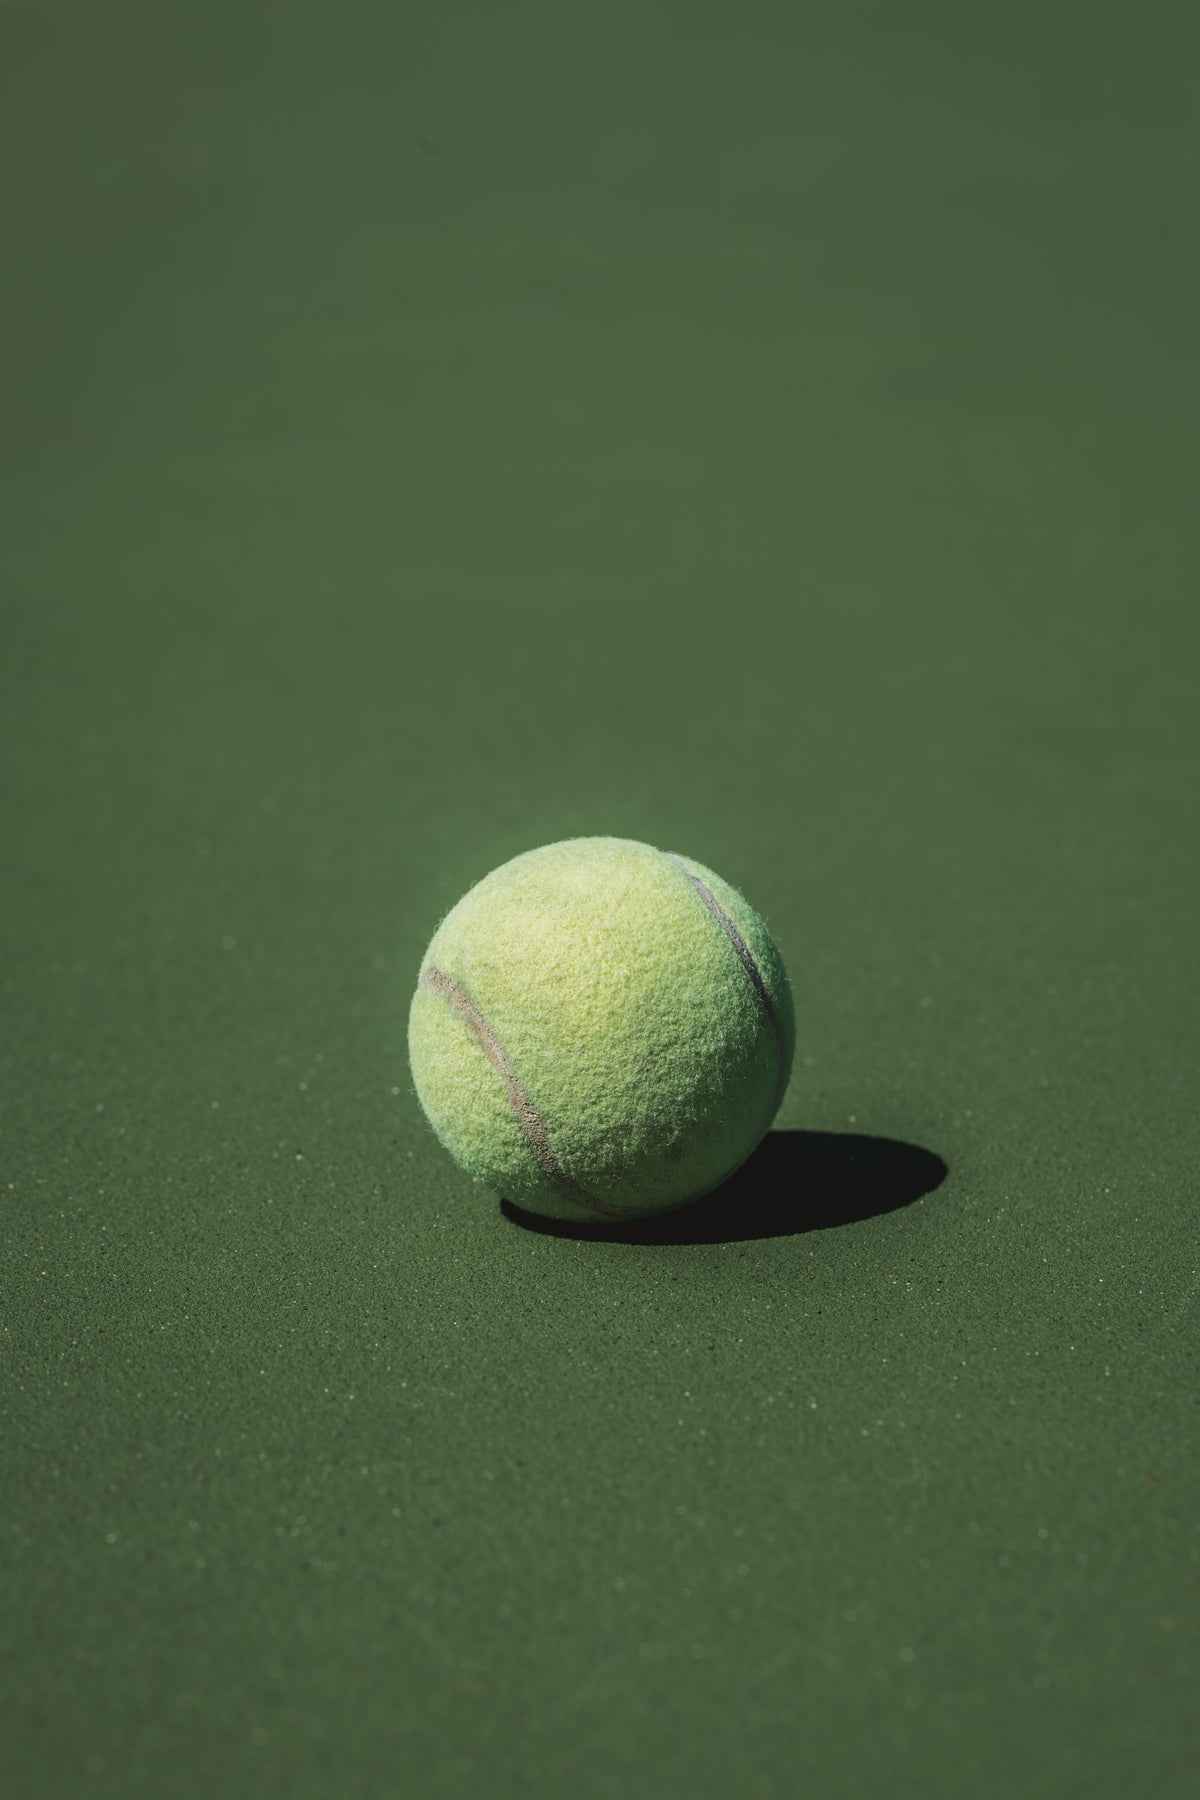 single tennis ball sits in the sun on the court